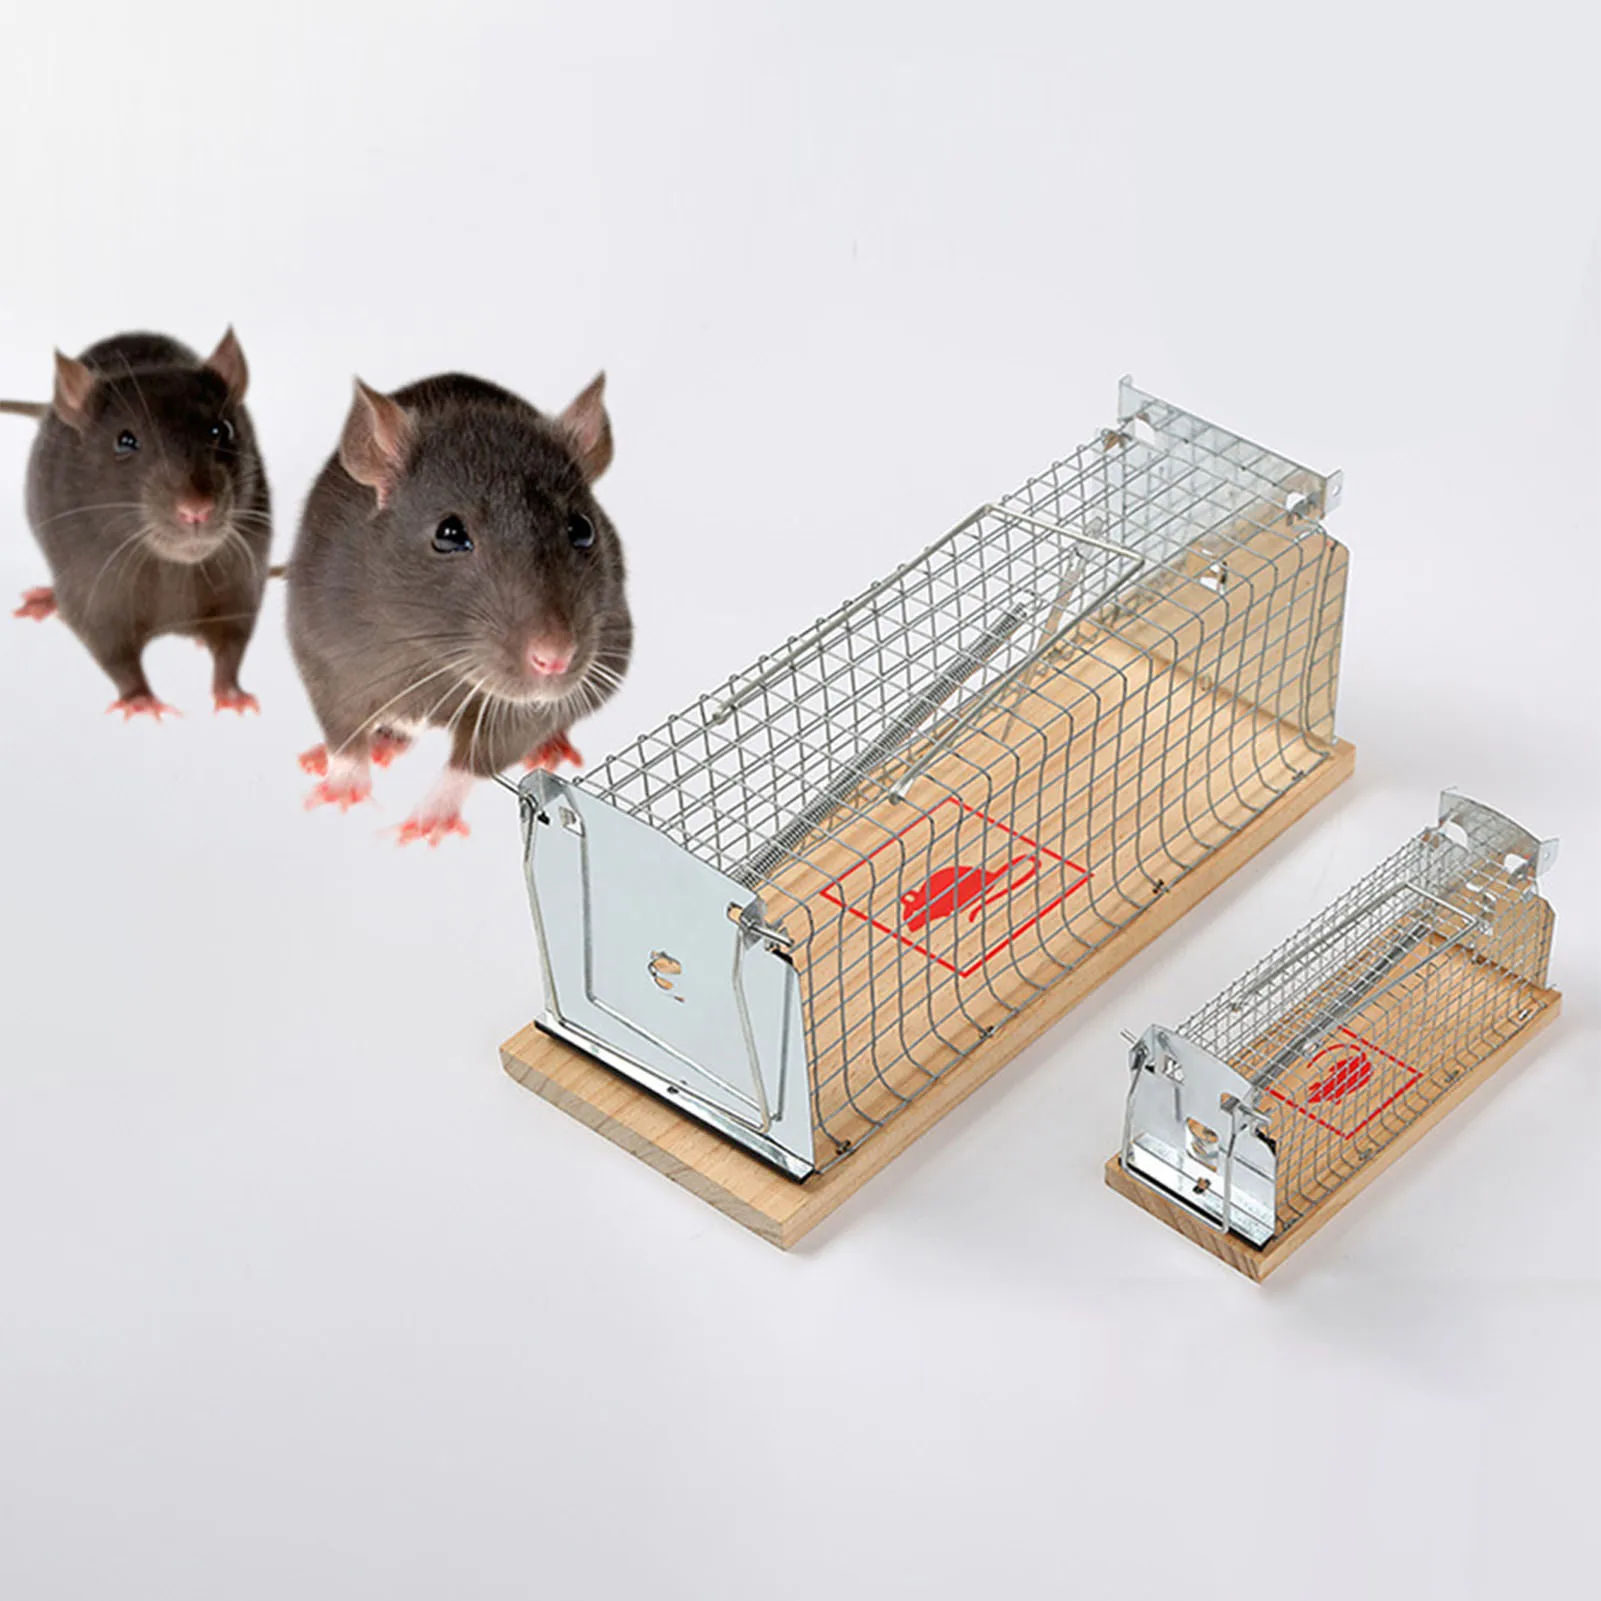 https://ae01.alicdn.com/kf/S195b141347484c6bbbfbef57caab05584/Indoor-and-Outdoor-Rats-Trap-Rats-Cage-Smart-Self-locking-Mousetrap-Mouse-Trap-Prevent-Home-from.jpg